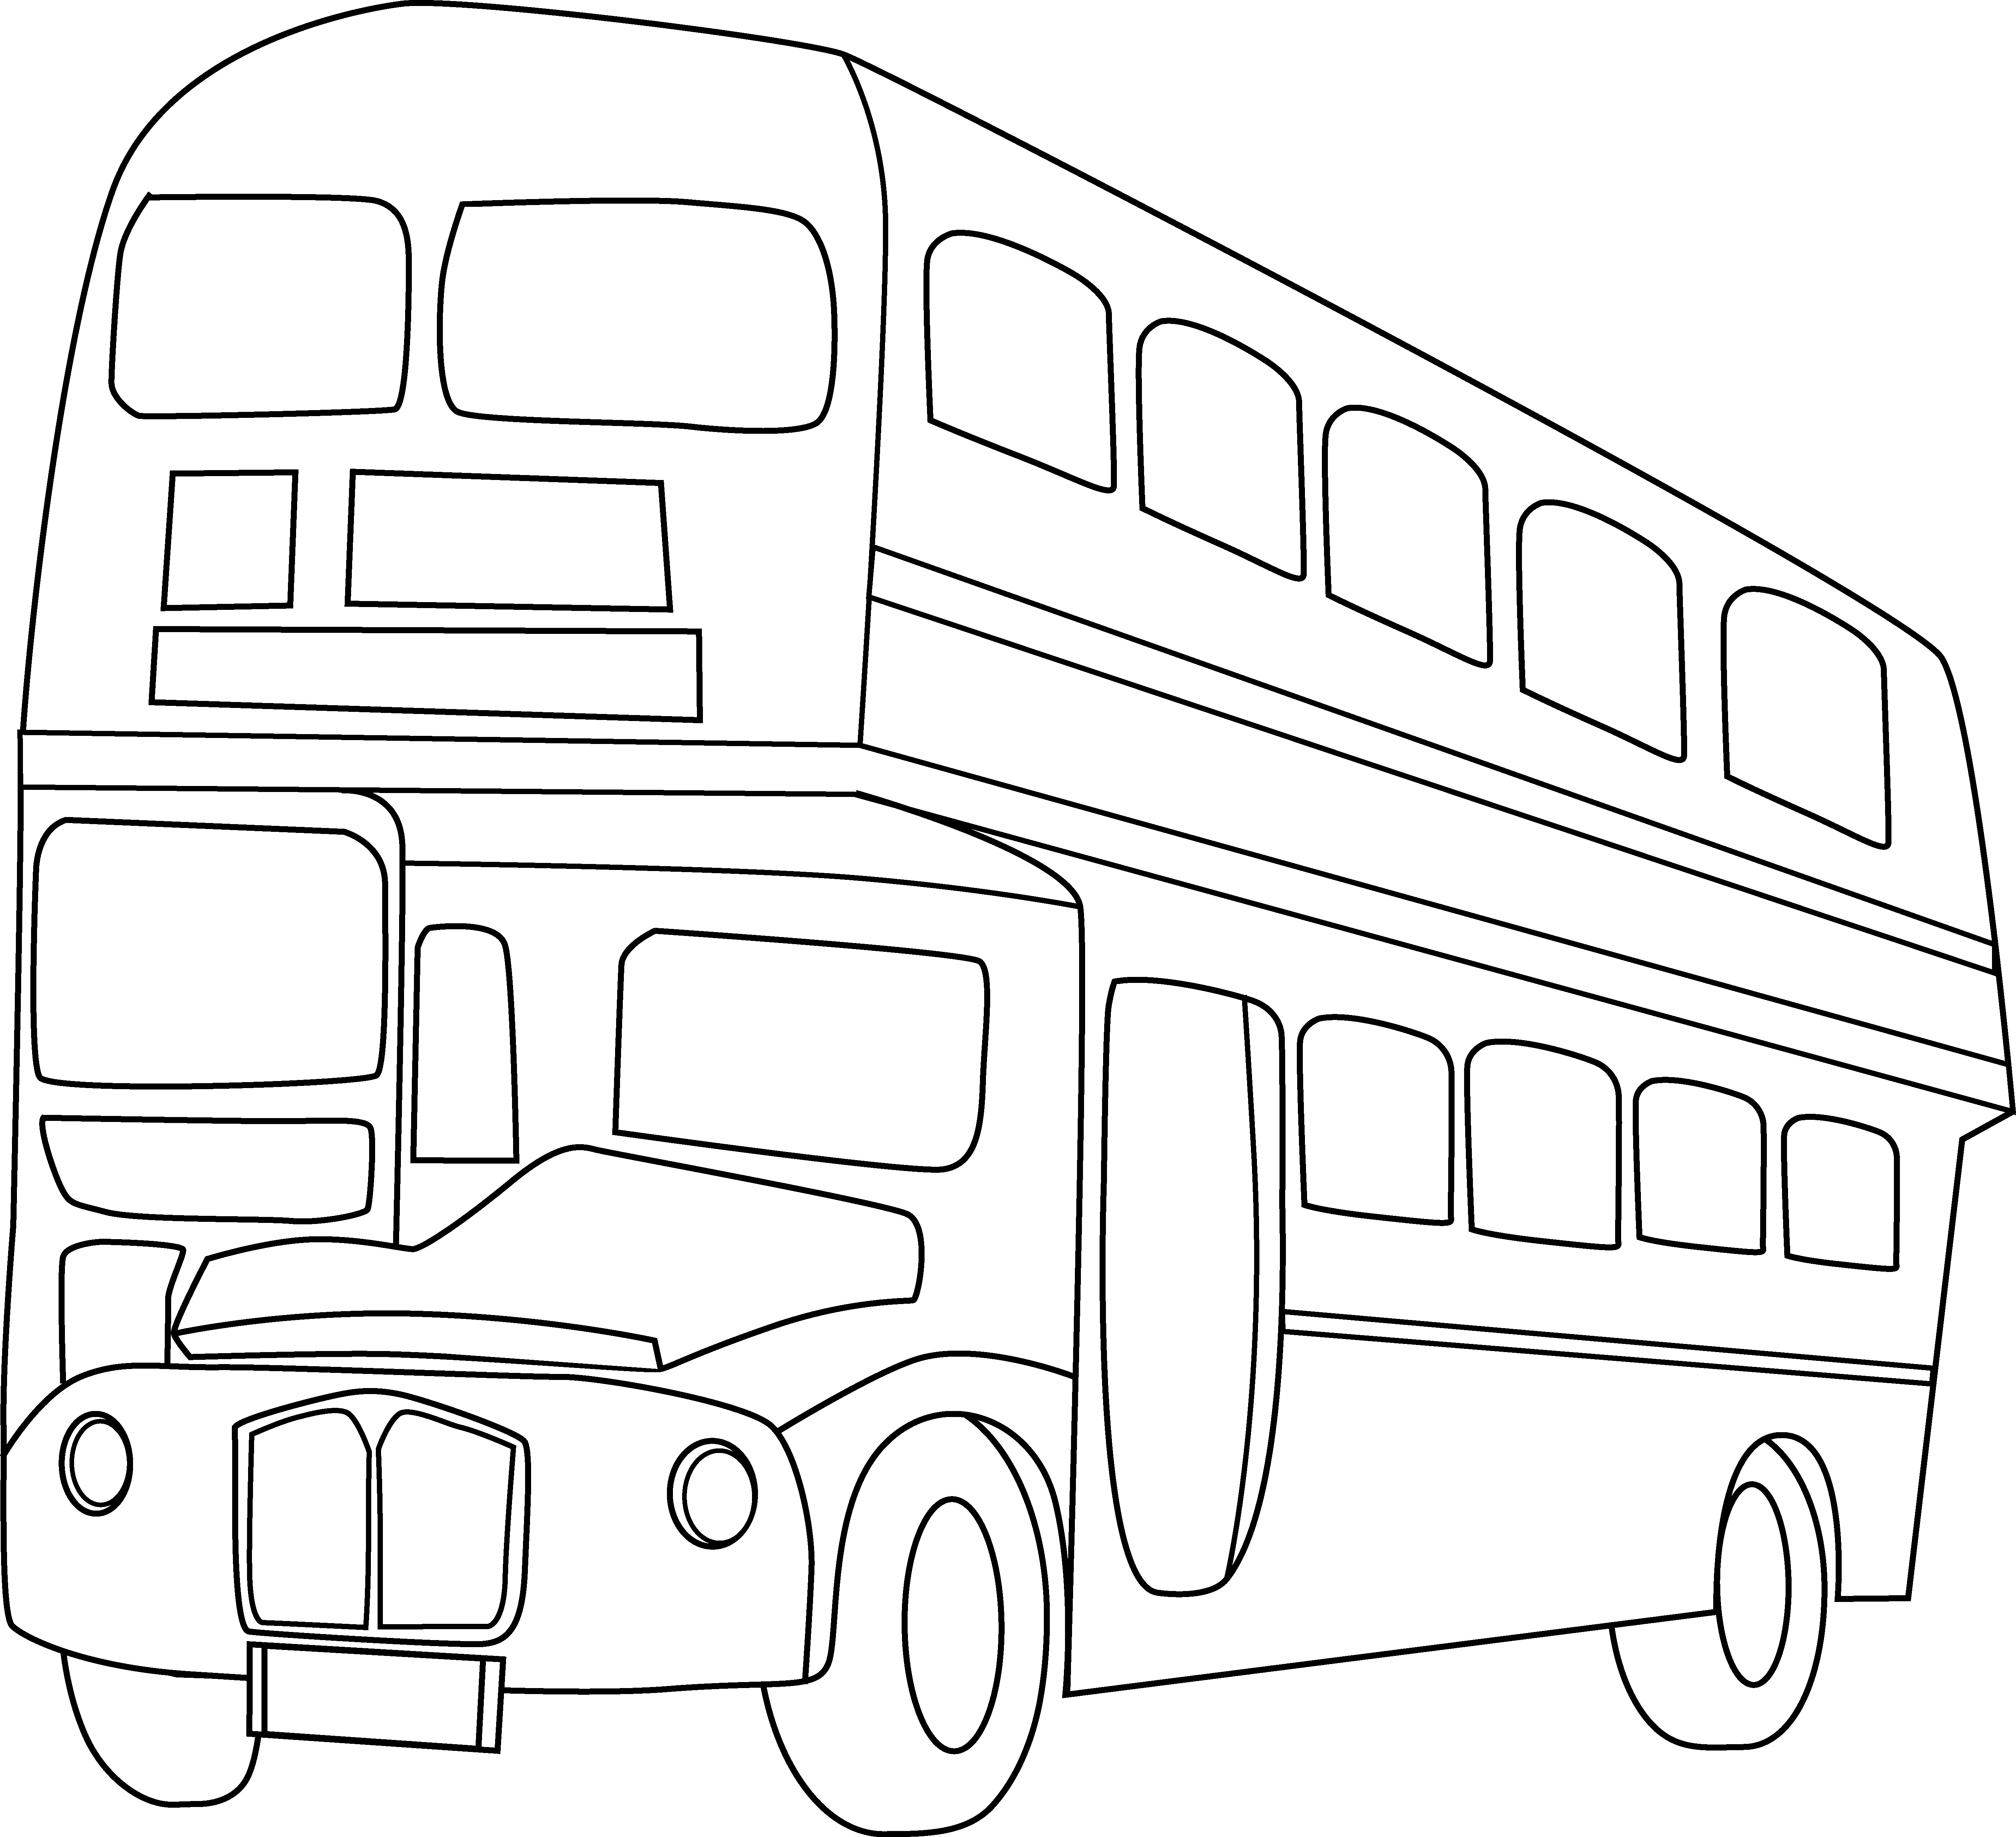 School bus  black and white double decker bus clipart black and white clipartfest